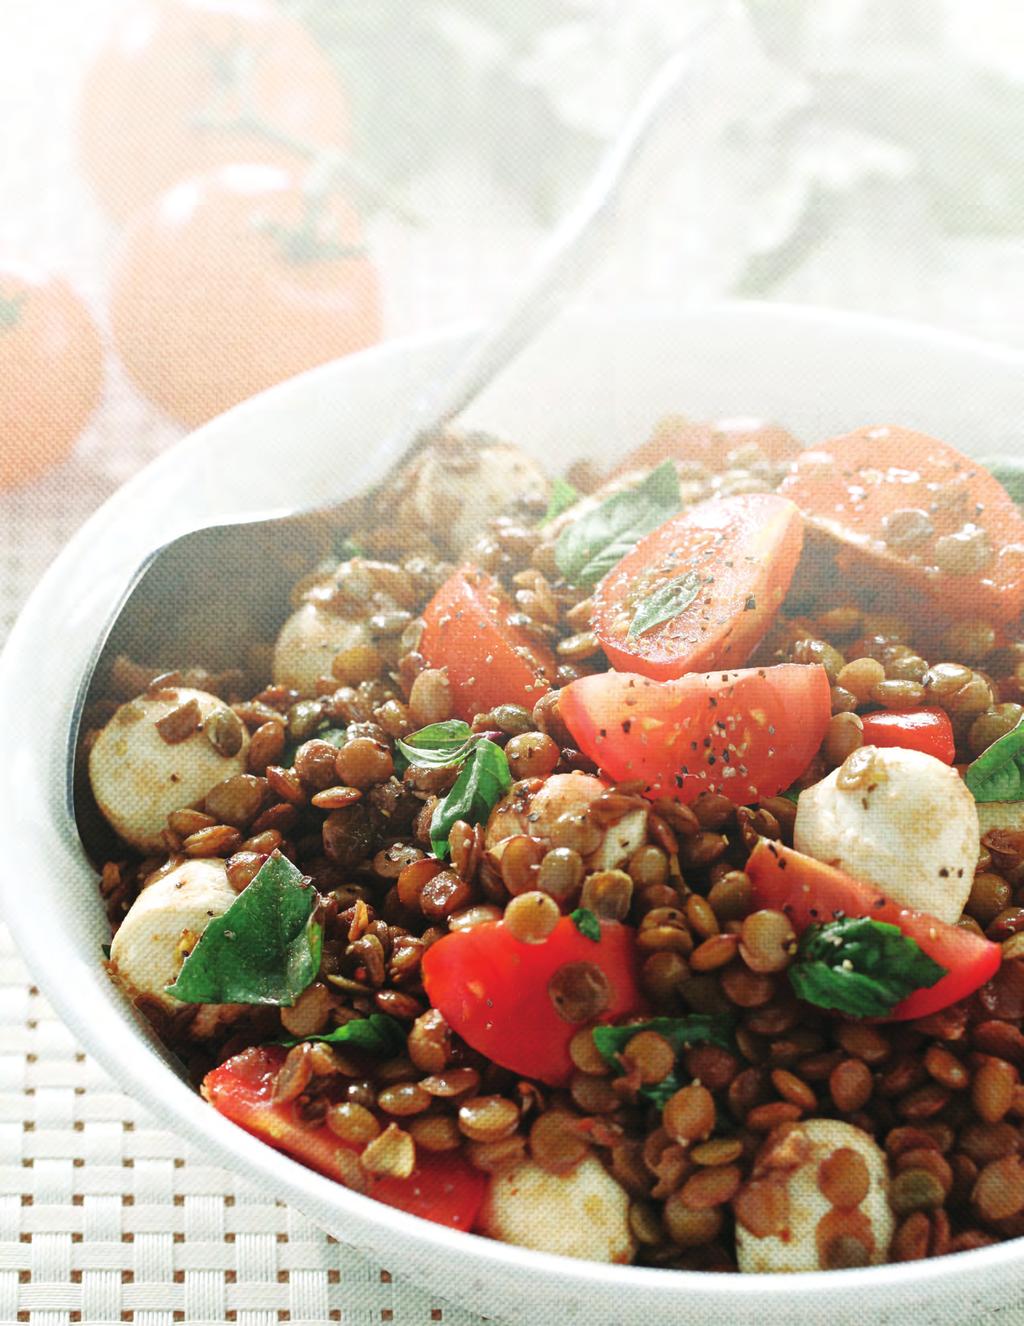 Balsamic Lentil Caprese Salad SALAD SERVINGS 4-6 PREP TIME 10 minutes TOTAL TIME 35 minutes canola or extra-virgin olive oil, for cooking 1 garlic clove, peeled and sliced 1 cup (250 ml) green